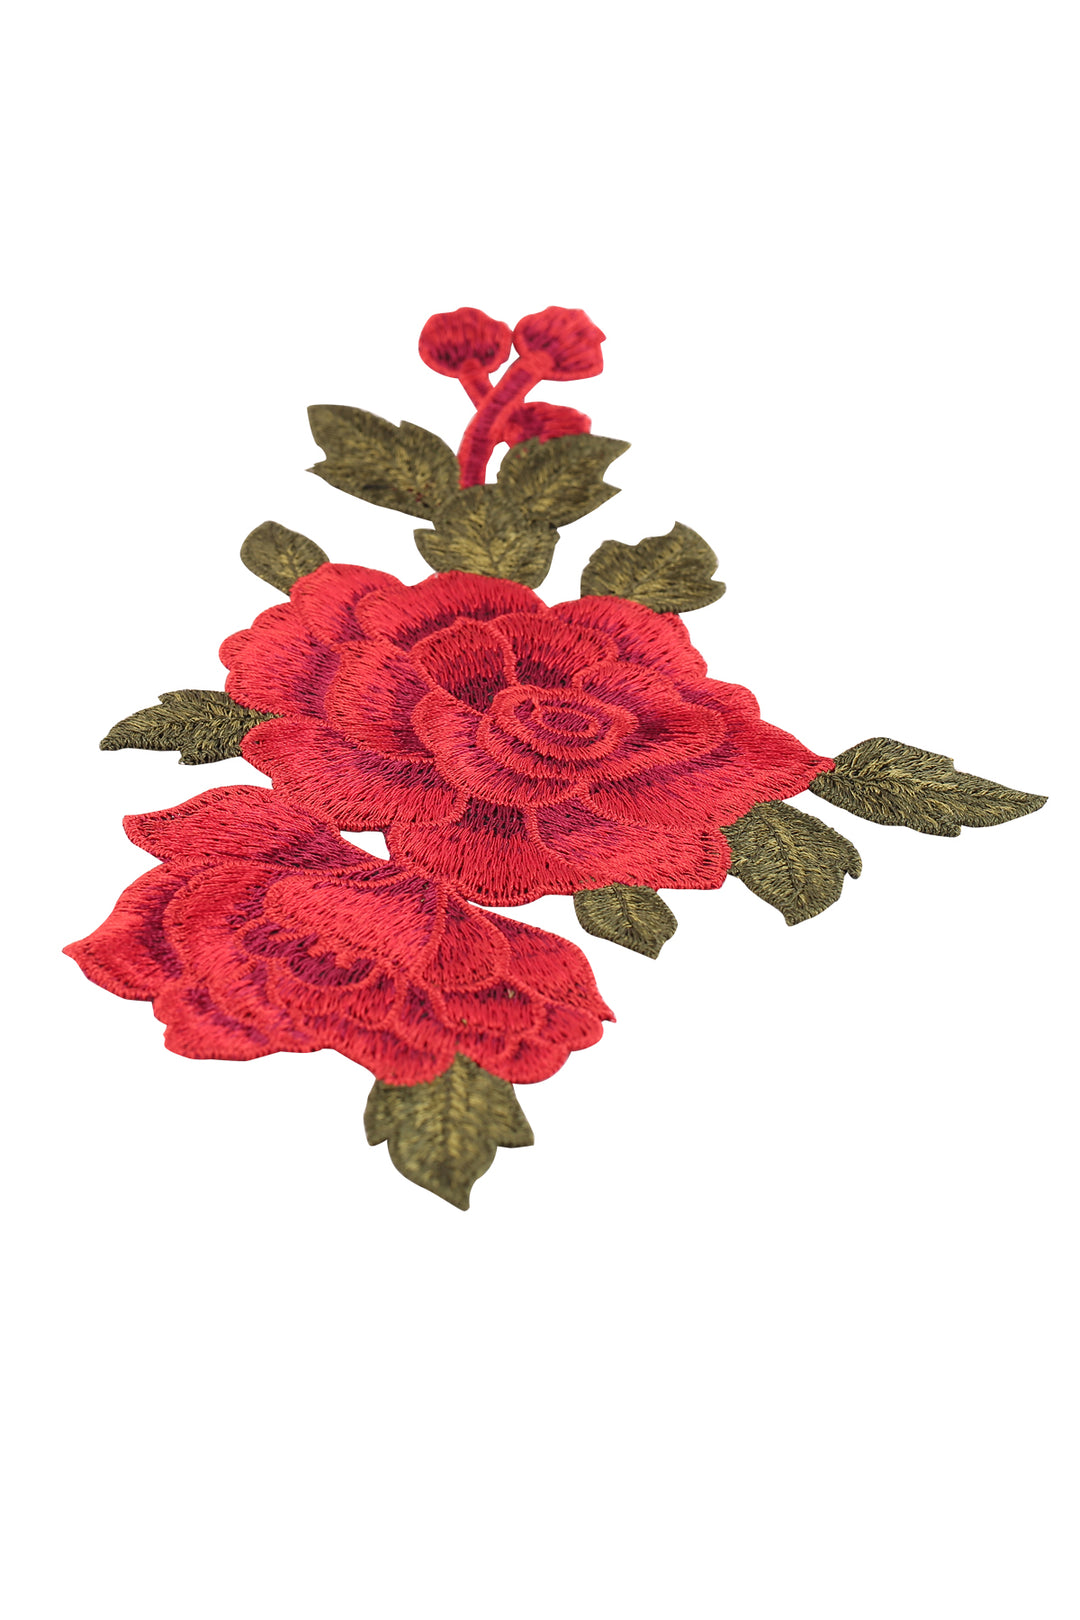 Pair of Sew on Red Flower Embroidery Patch